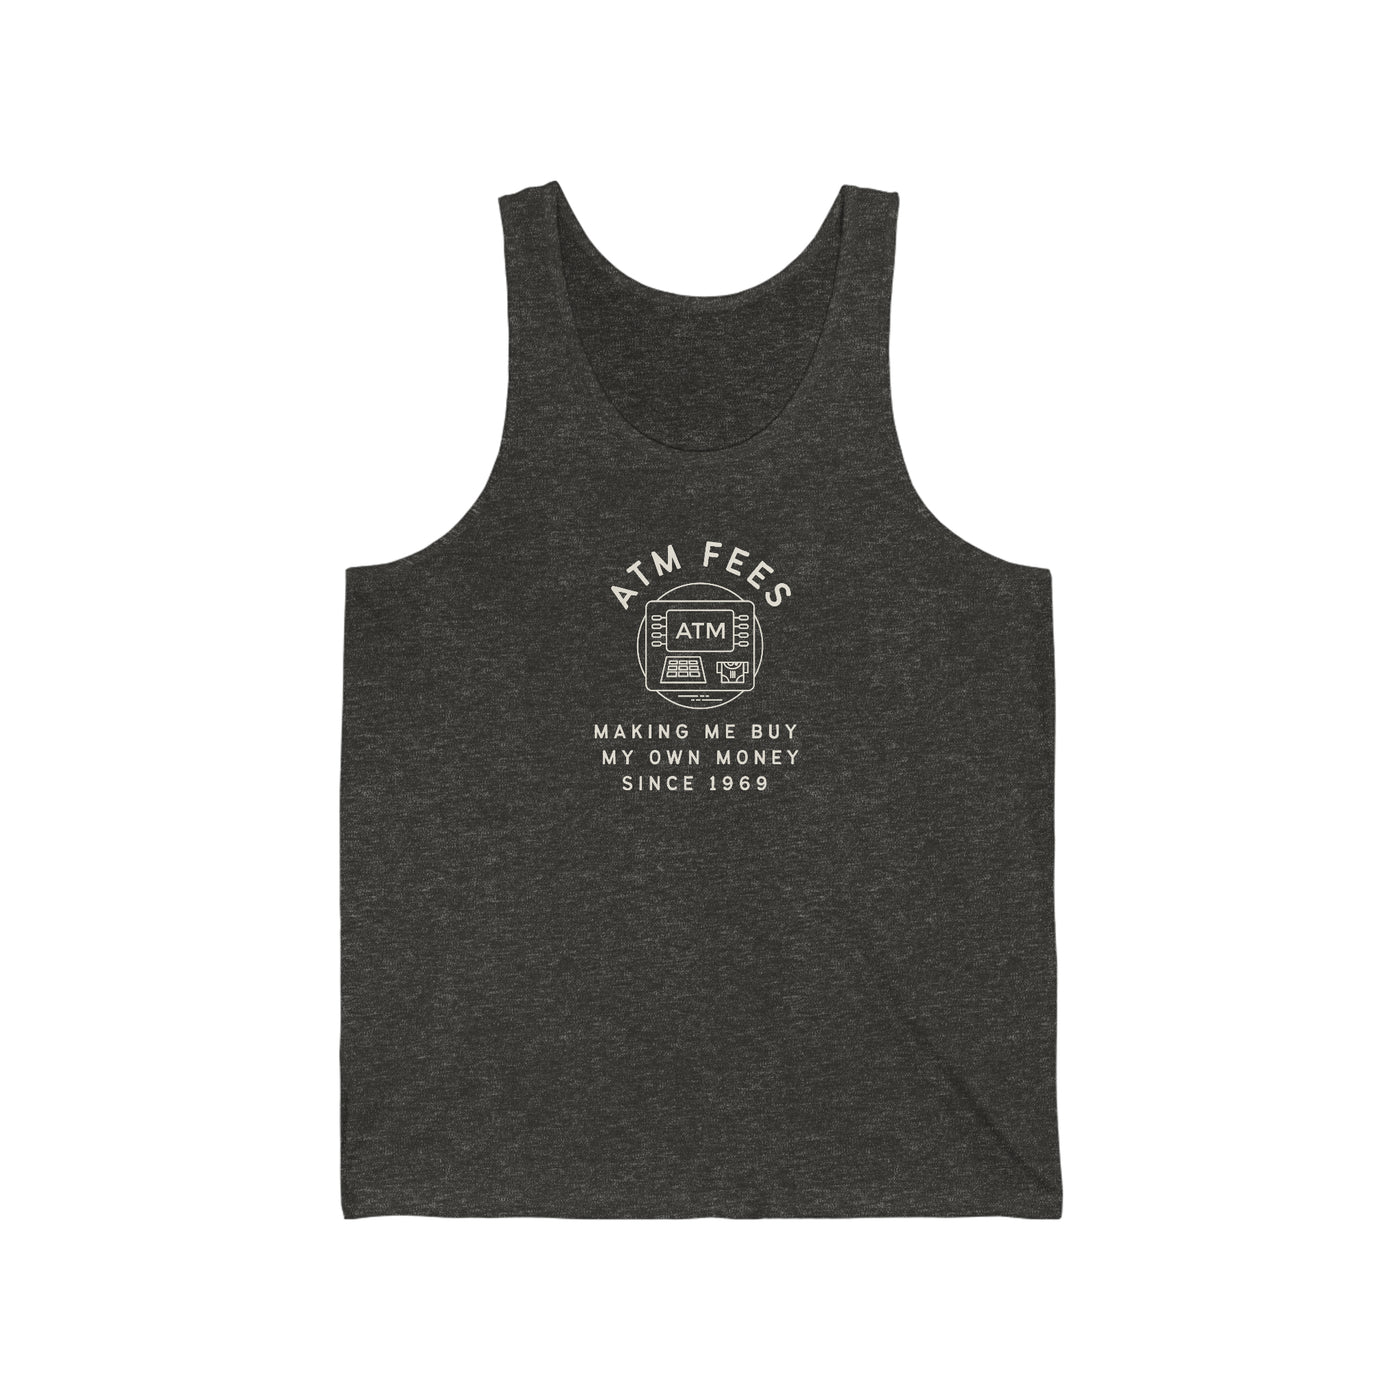 ATM Fees Making Me Buy My Own Money Since 1969 Unisex Tank Top